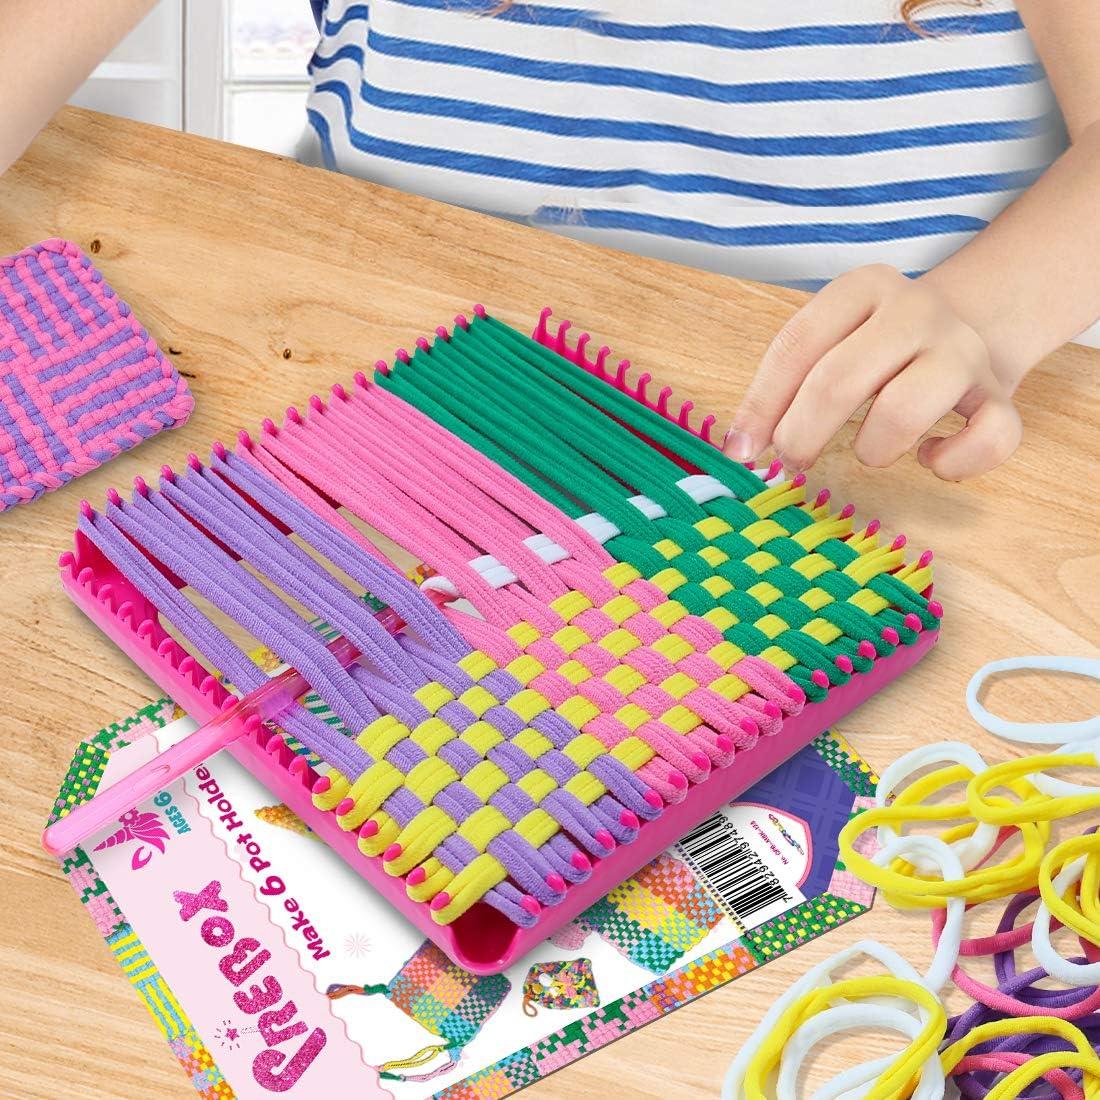  IQKidz Weaving Loom Kit for Kids and Adults - Potholder Weave  Looming Toys, Gift for Girls Ages 6 7 8 9 10 11 12 13 Years Old and Above,  Square Buildable Loom Knitting Activity, 224 Craft Loops